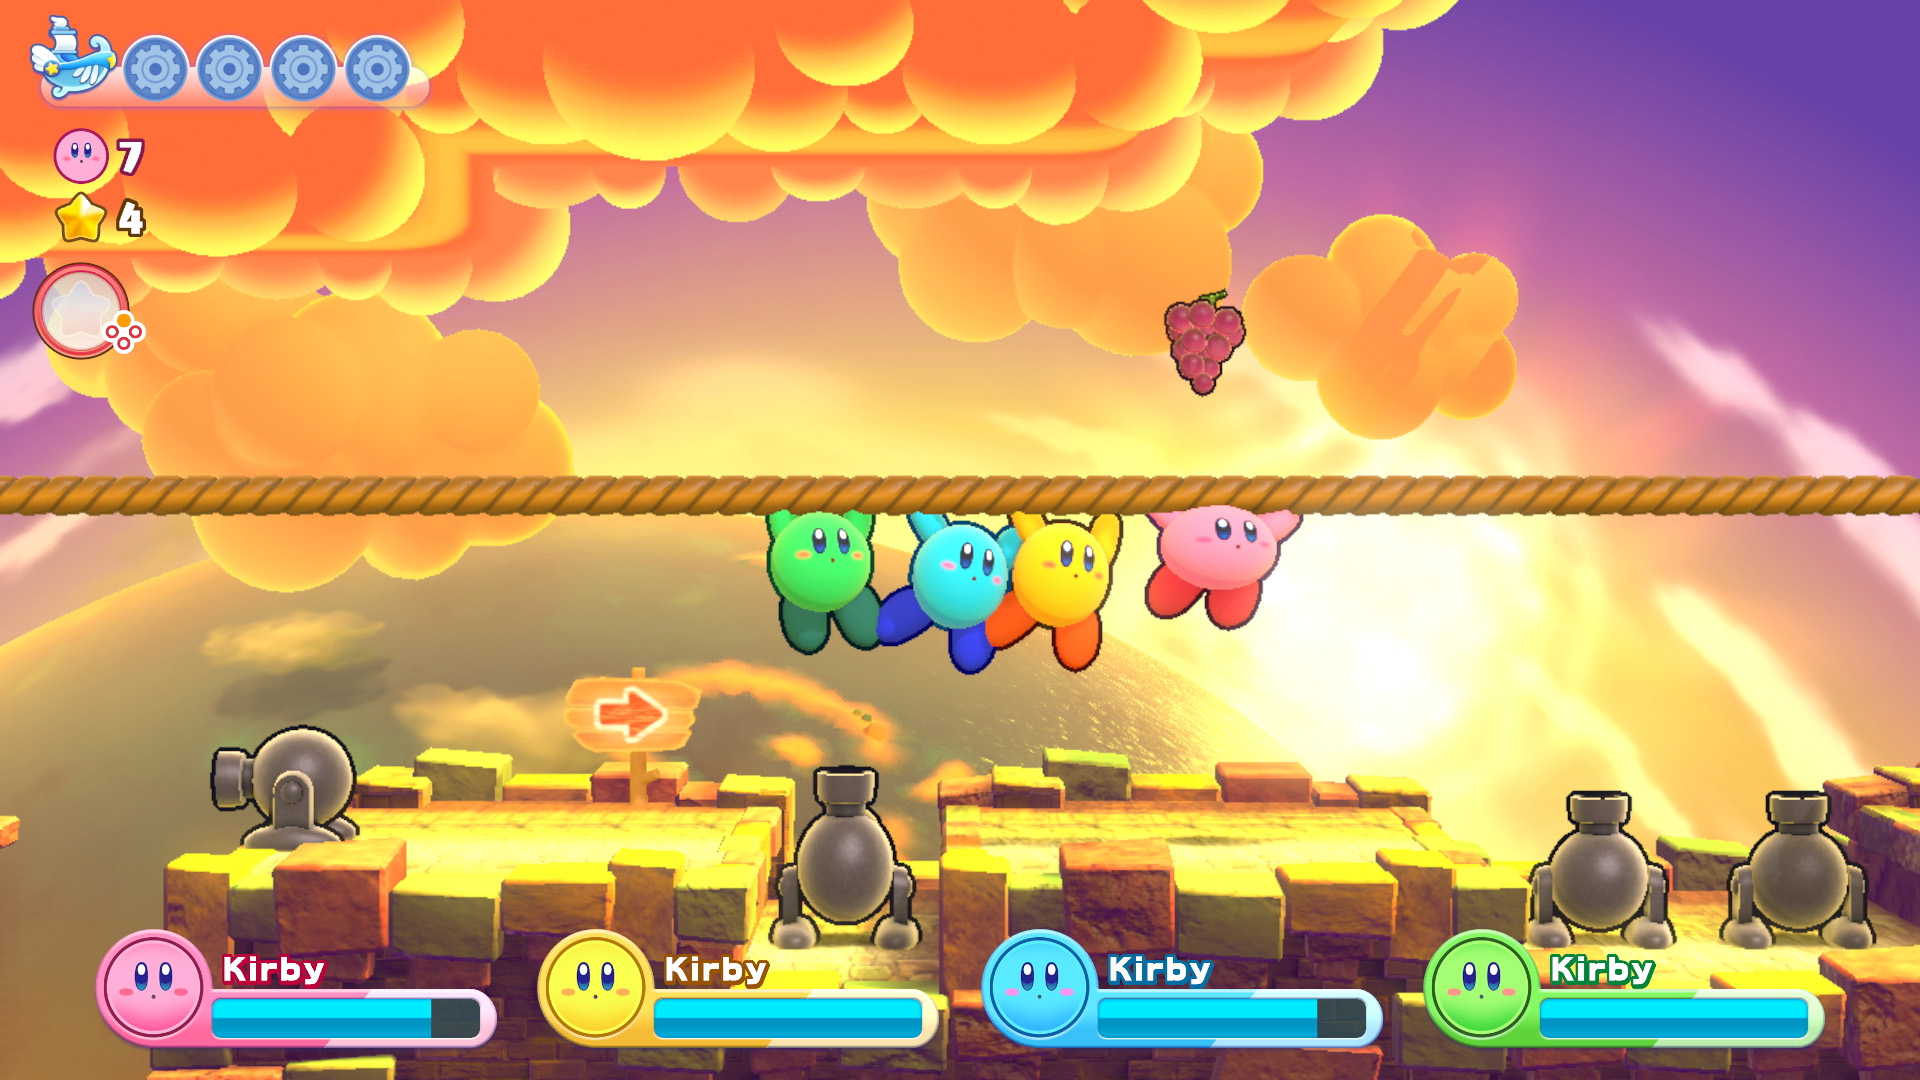 Kirby's Return To Dream Land Deluxe Nintendo Switch Account Pixelpuffin.net Activation Link